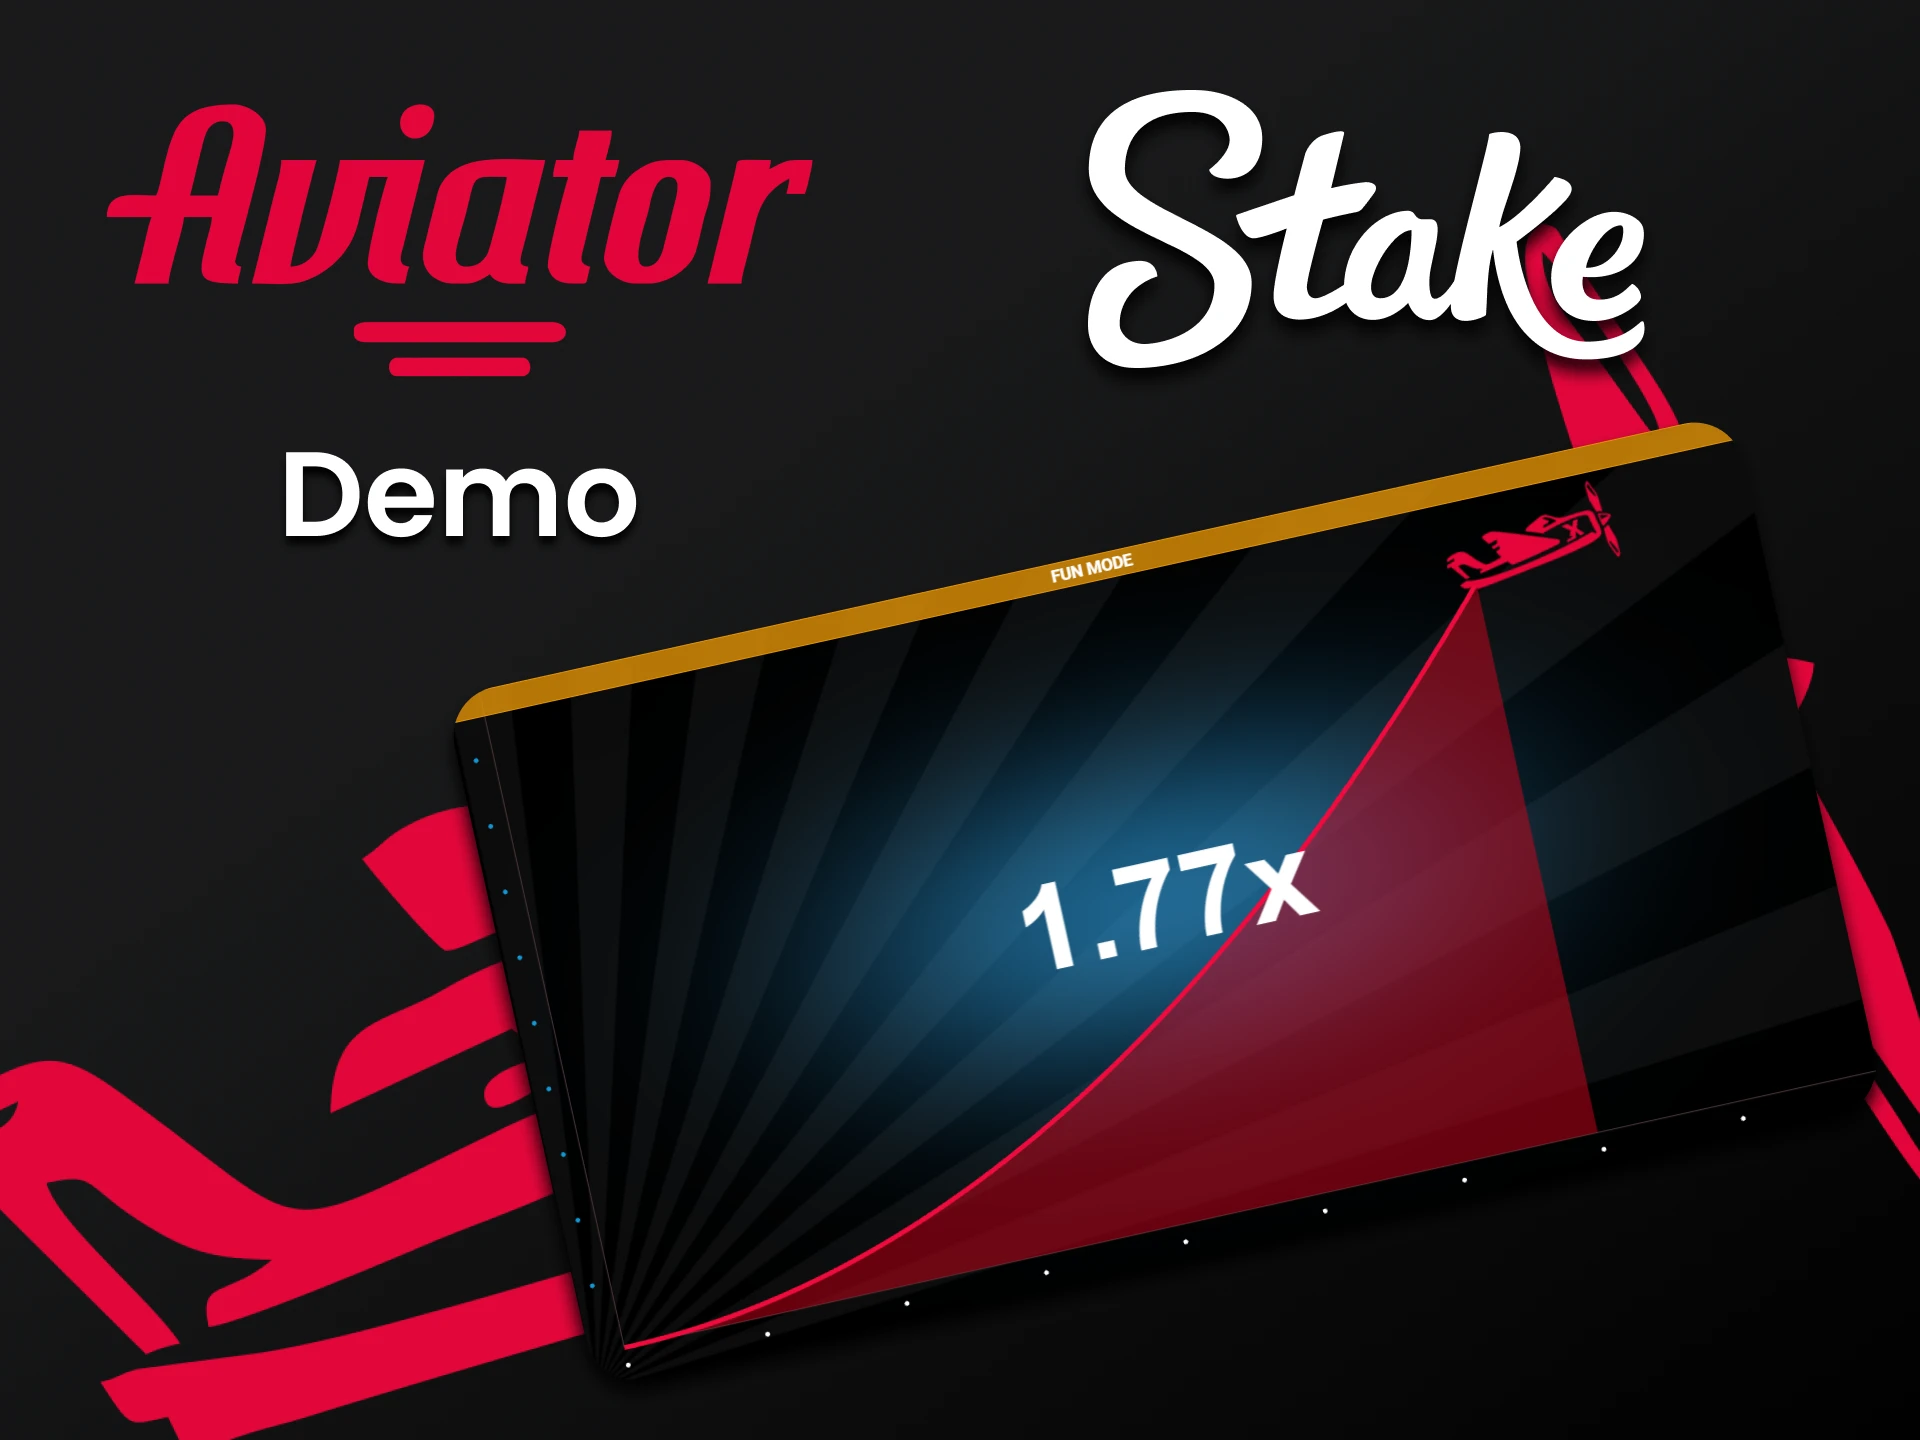 Practice in the demo version of the game Aviator on Stake.